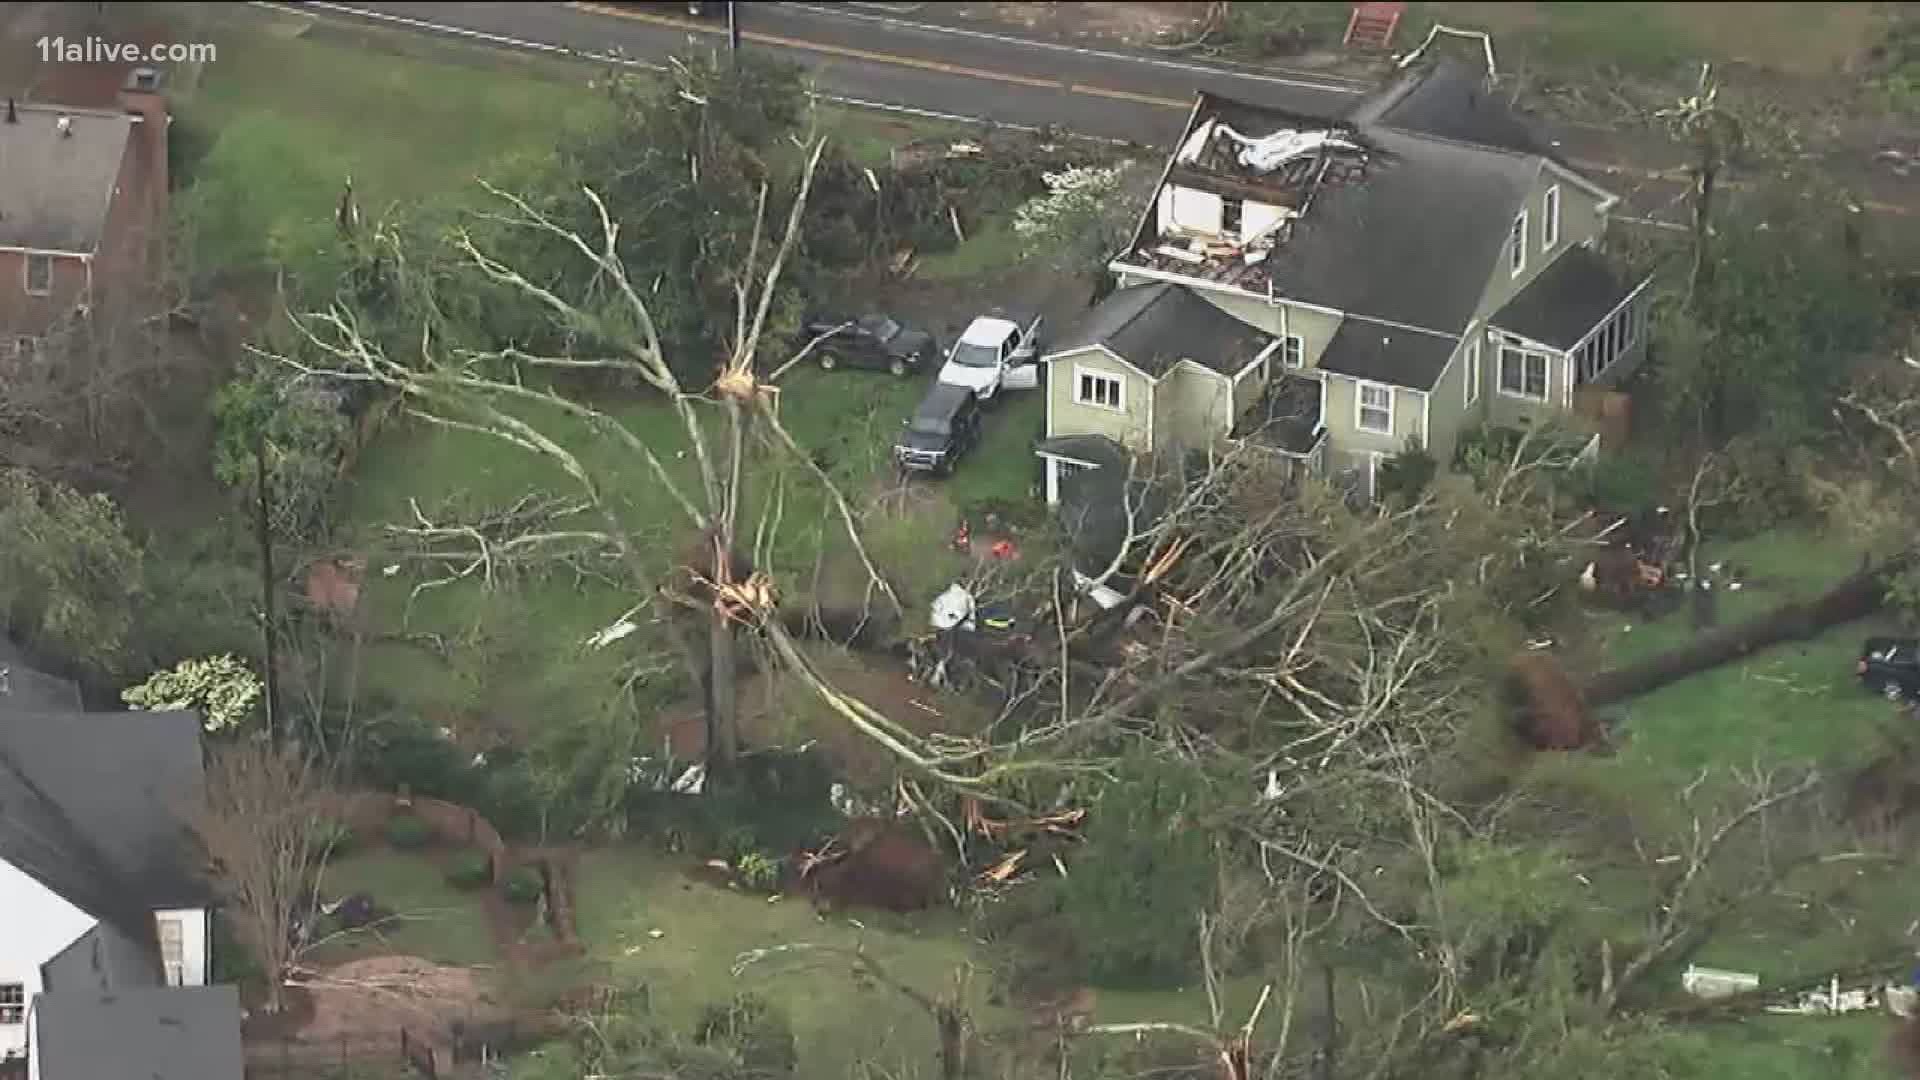 Schools, homes, trees and more were ripped apart after a "catastrophic" tornado moved through.